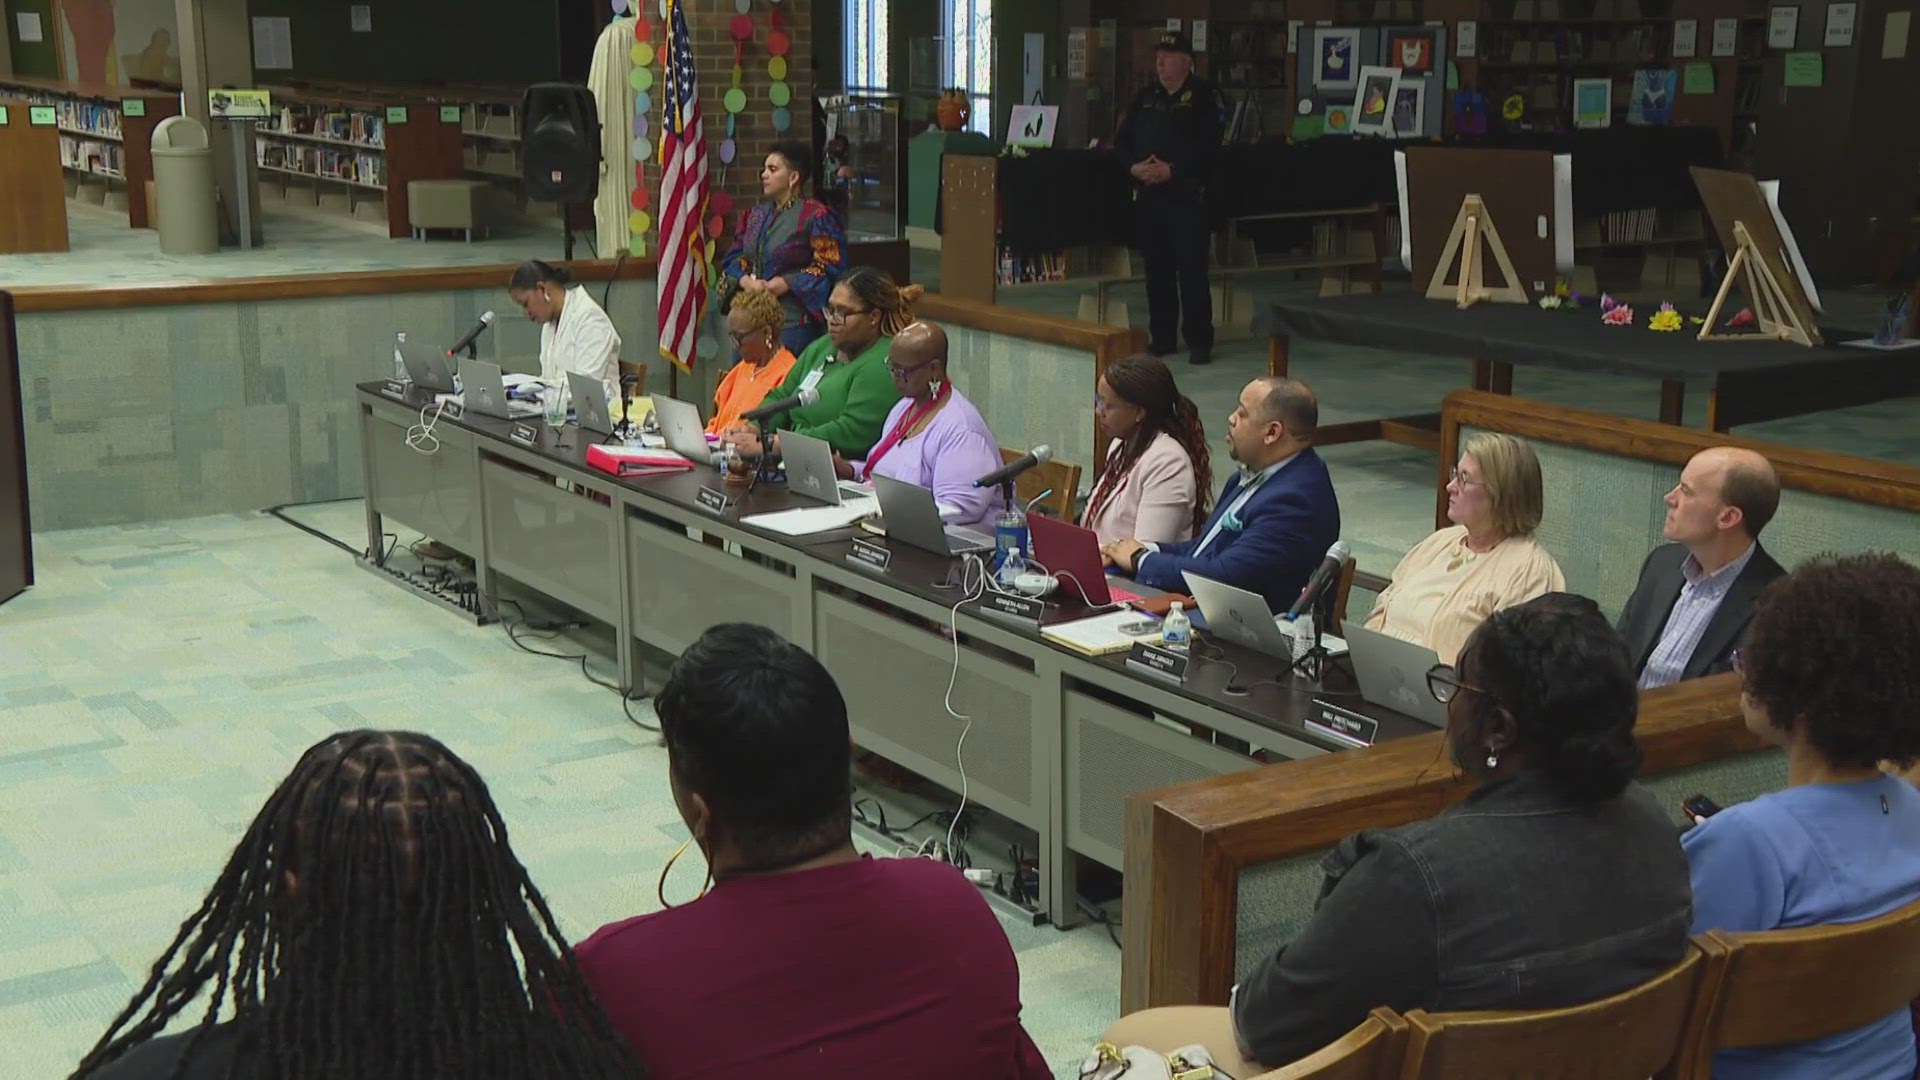 IPS parents took their frustrations directly to the school boardThursday.